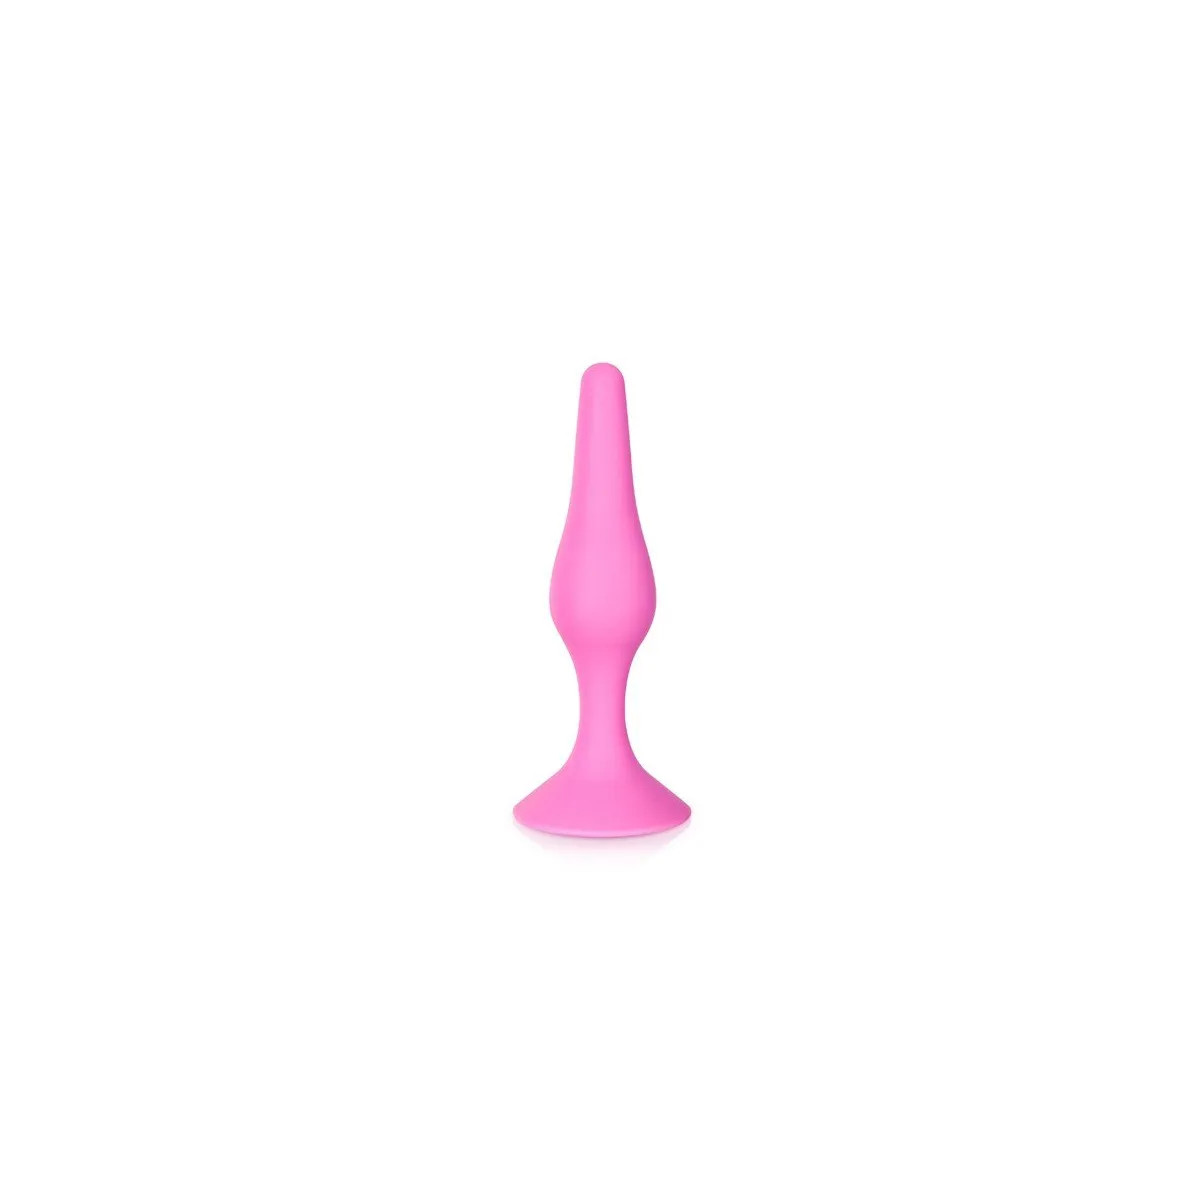 Plug Anal Suction Cup Pink Glamy L